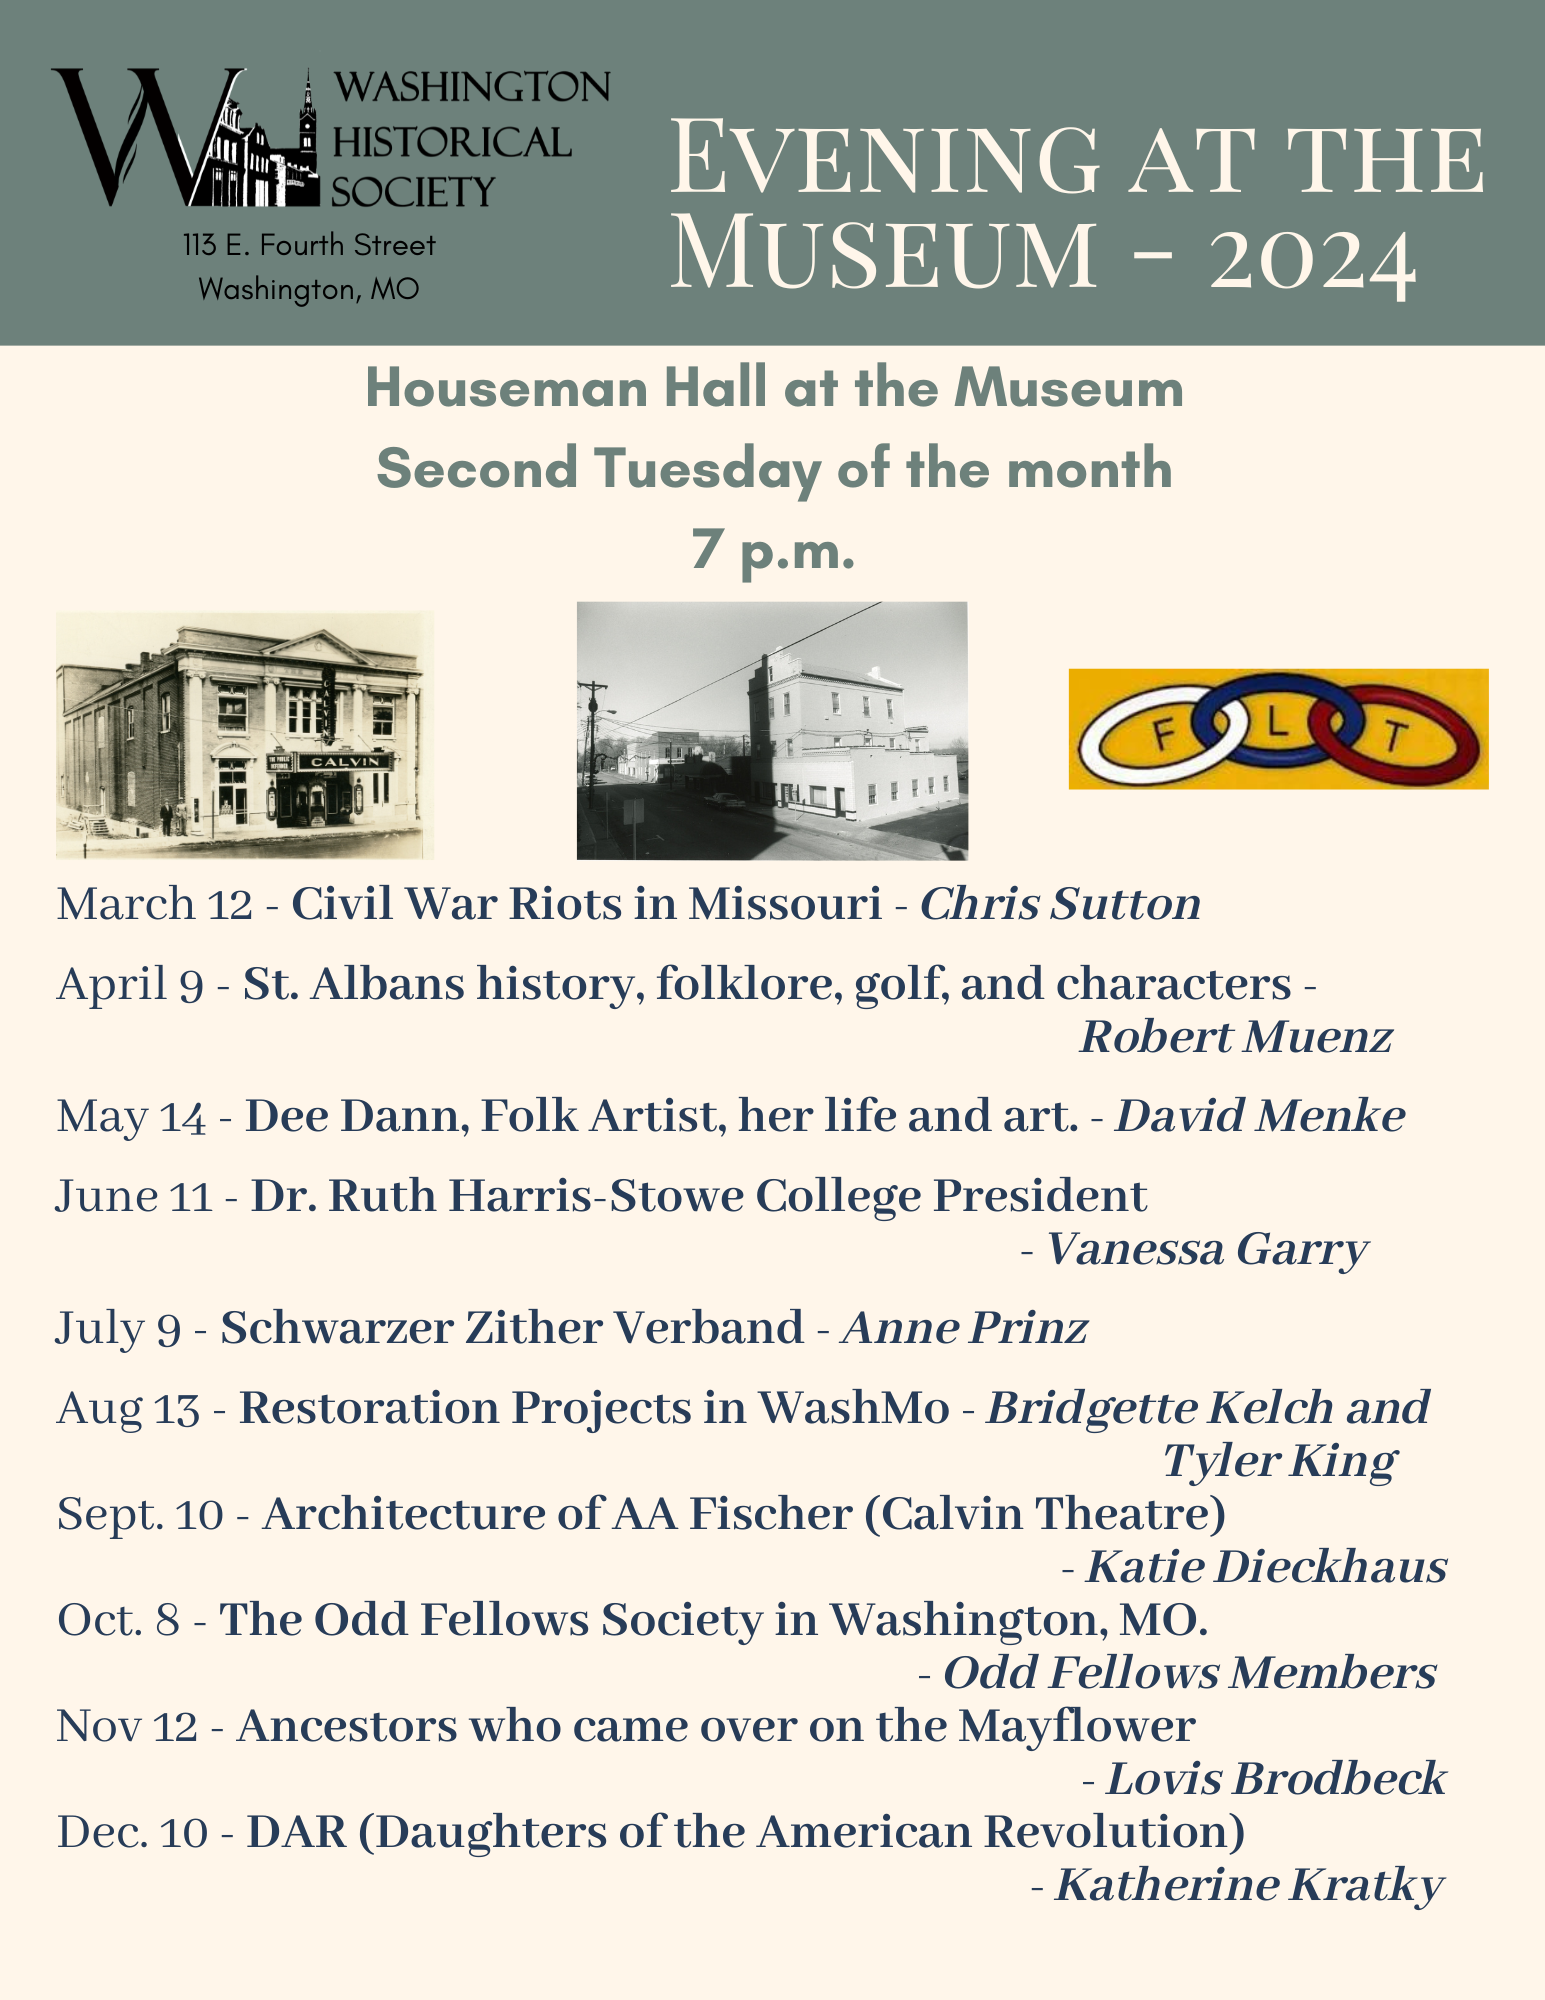 presentations-are-held-in-houseman-hall-1st-floor-of-the-museum-on-the-second-tuesday-of-the-month-at-7pm..png